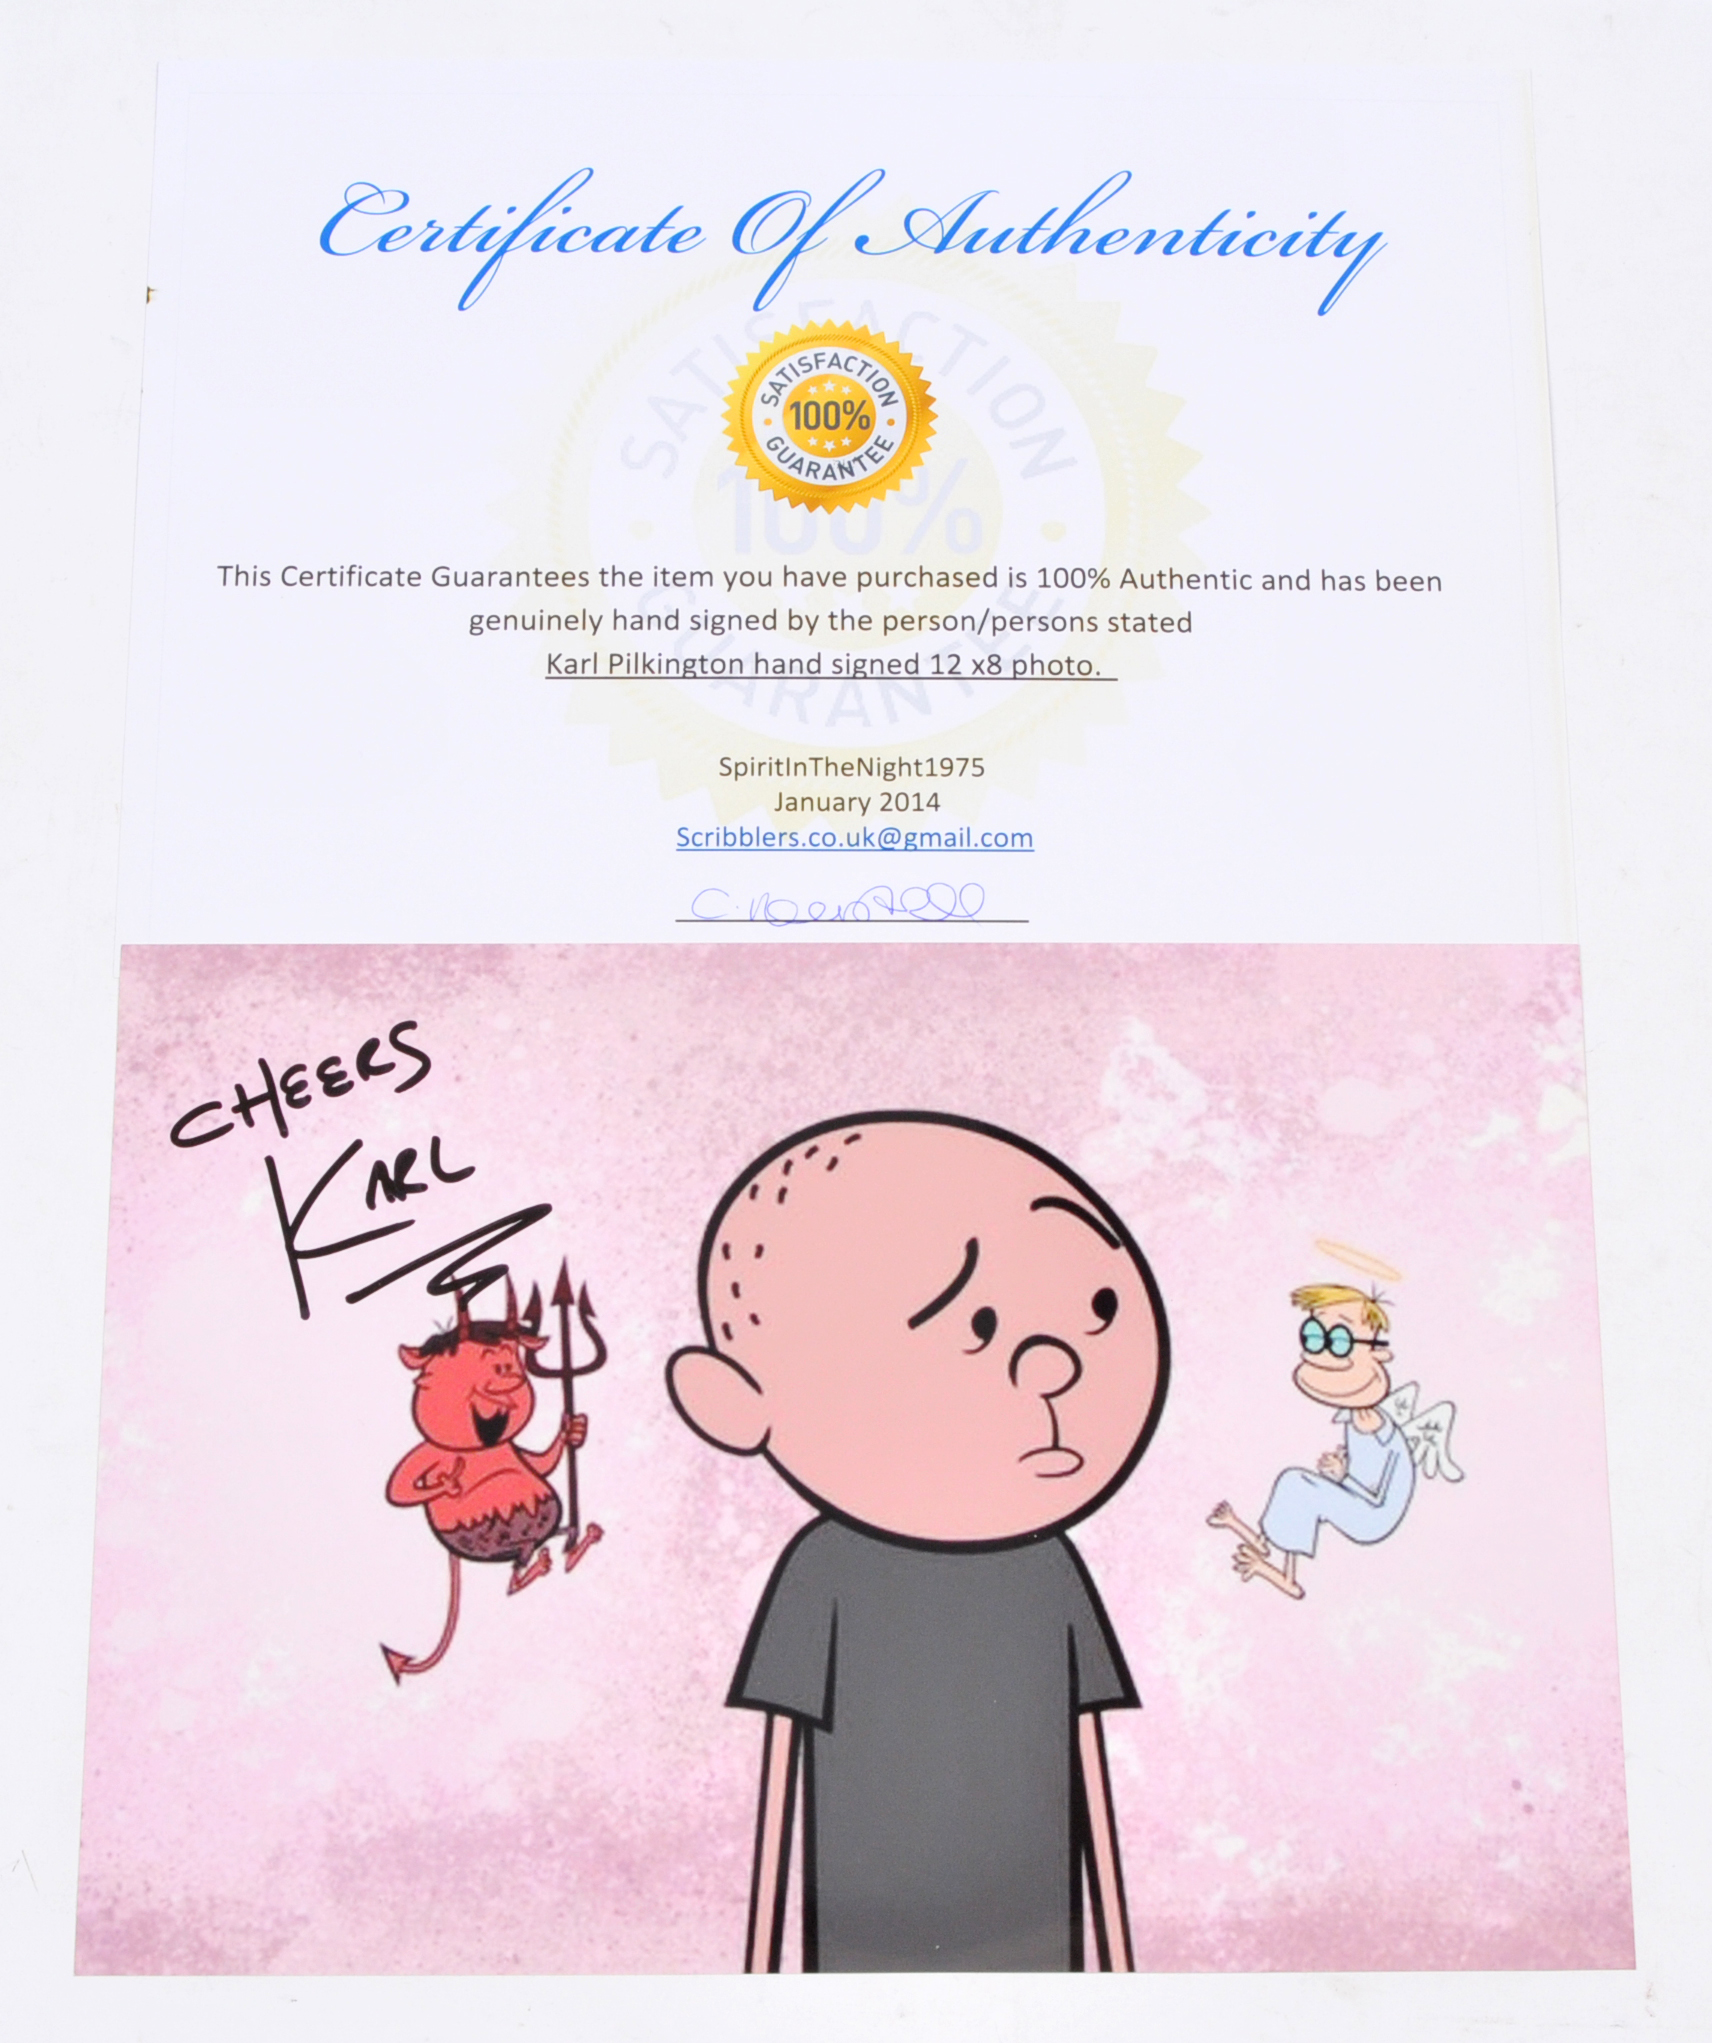 Karl Pilkington signed picture